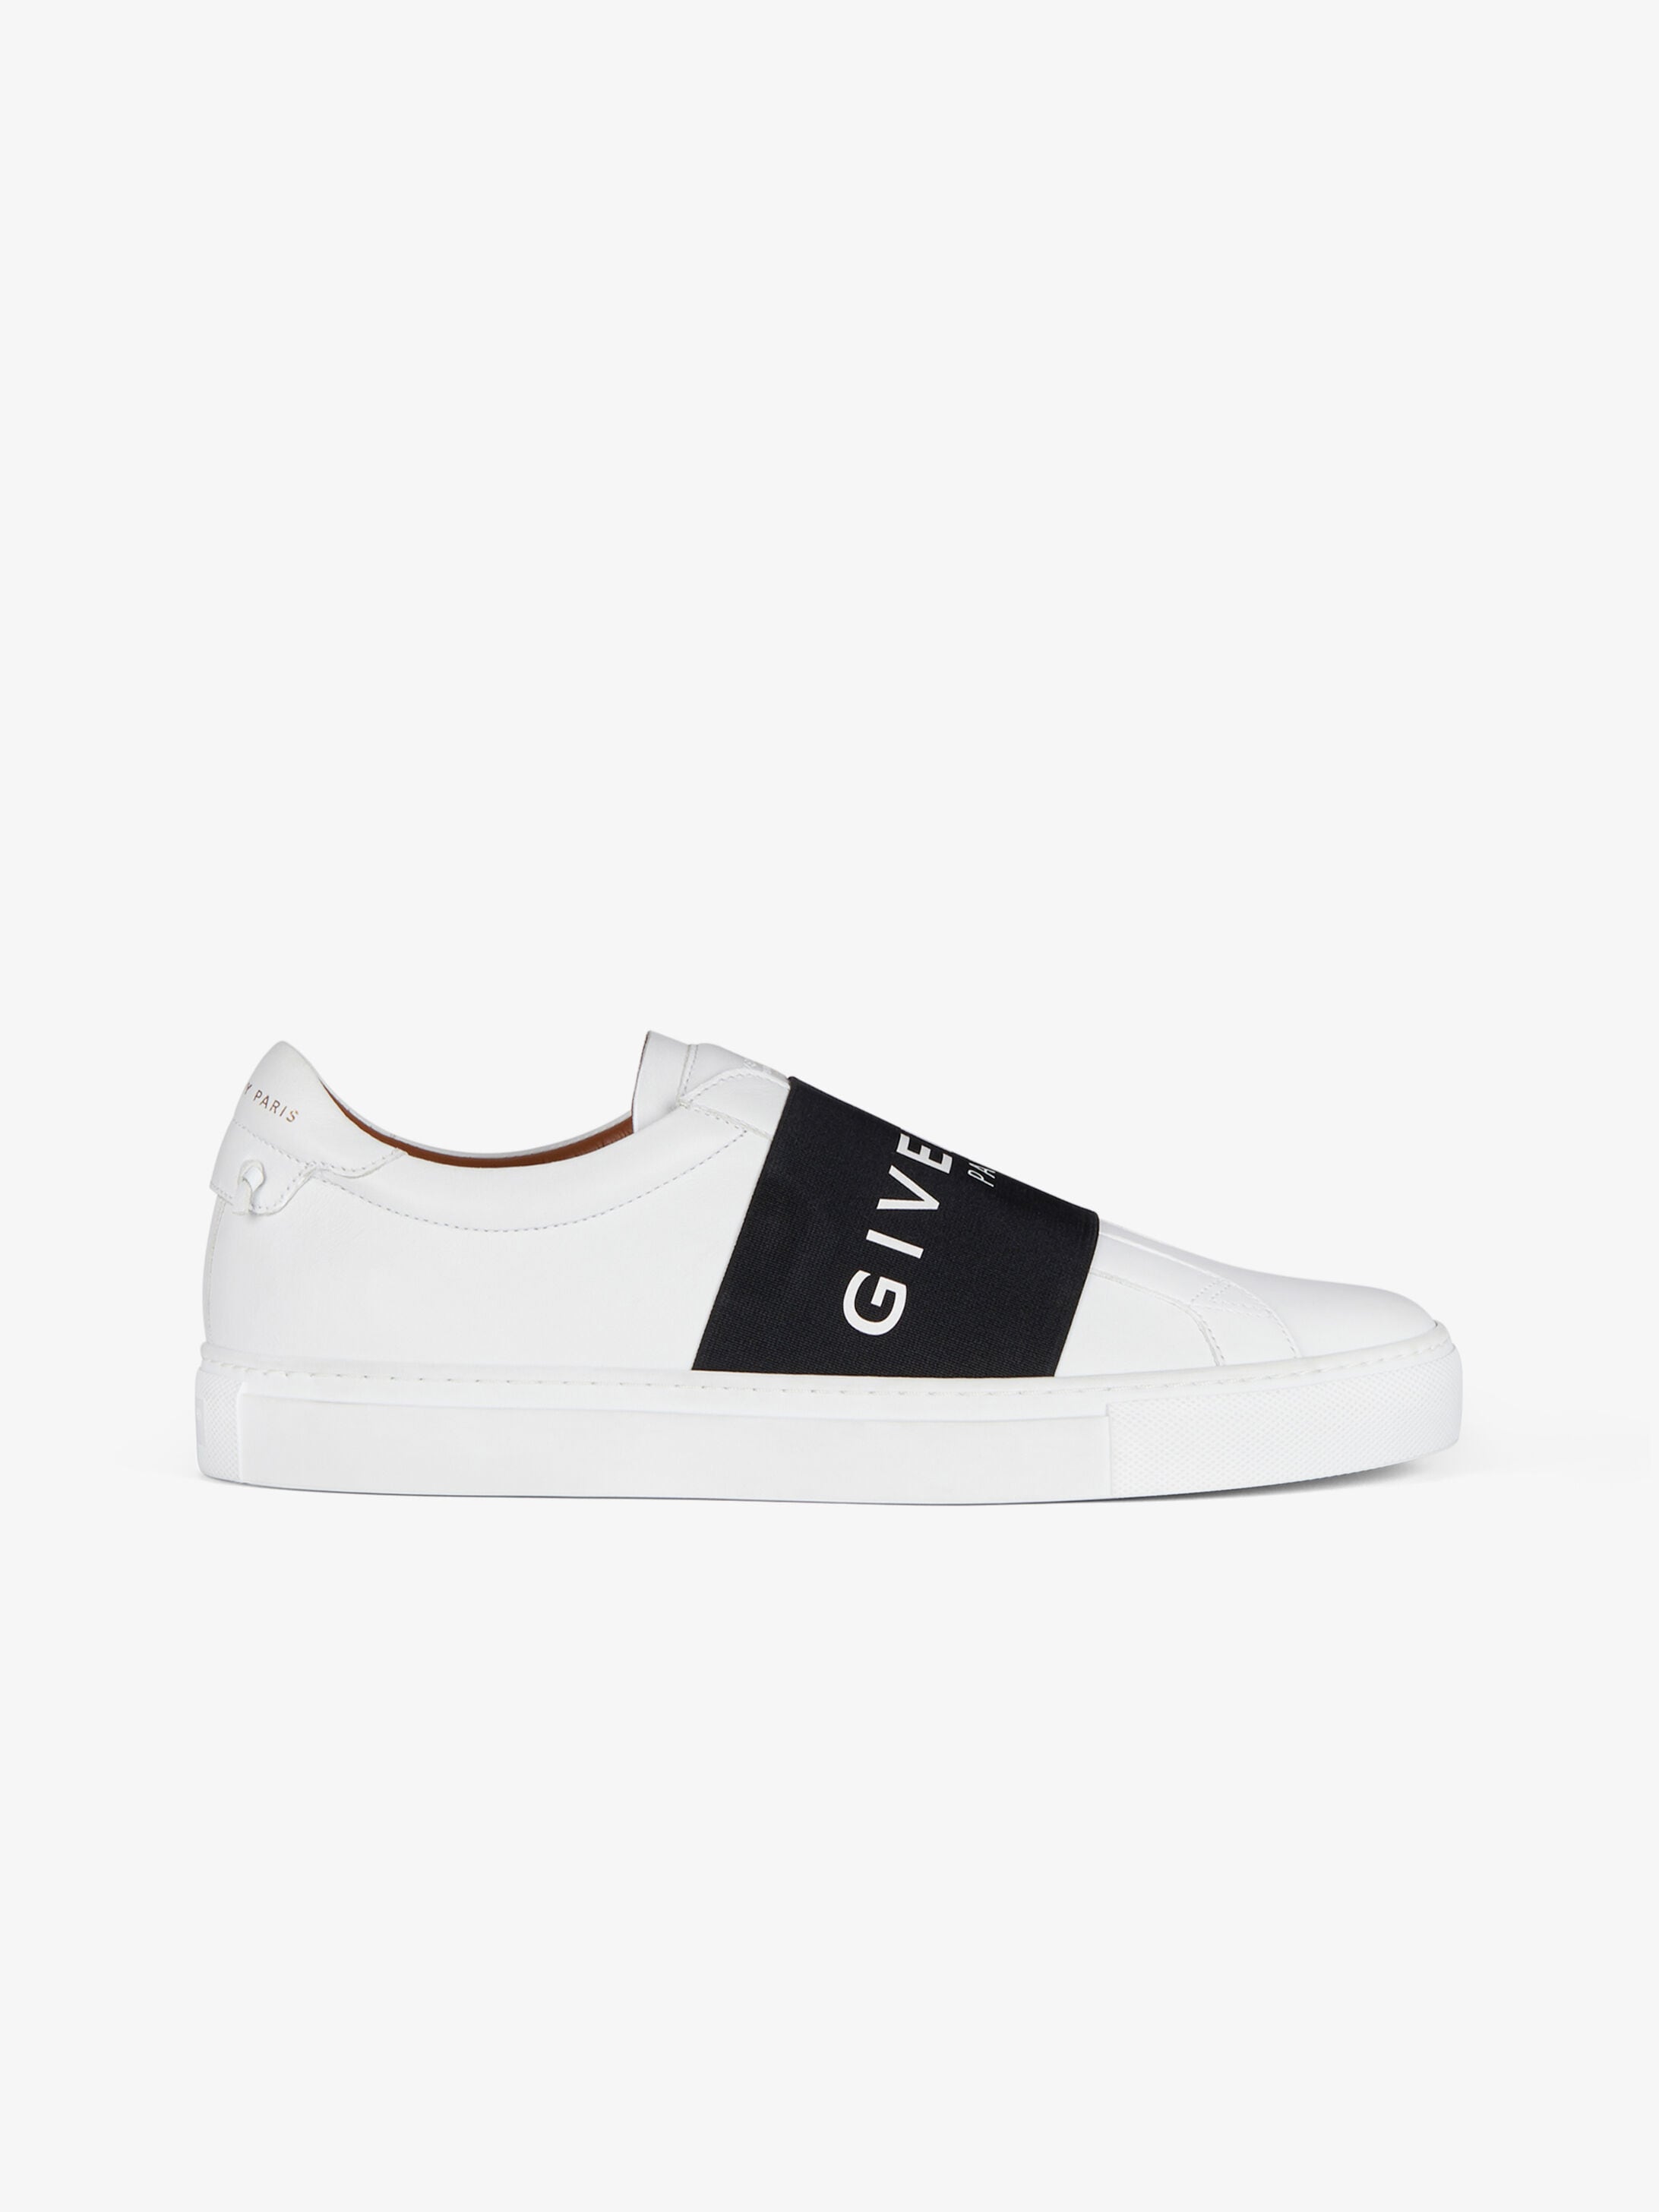 givenchy white sneakers men